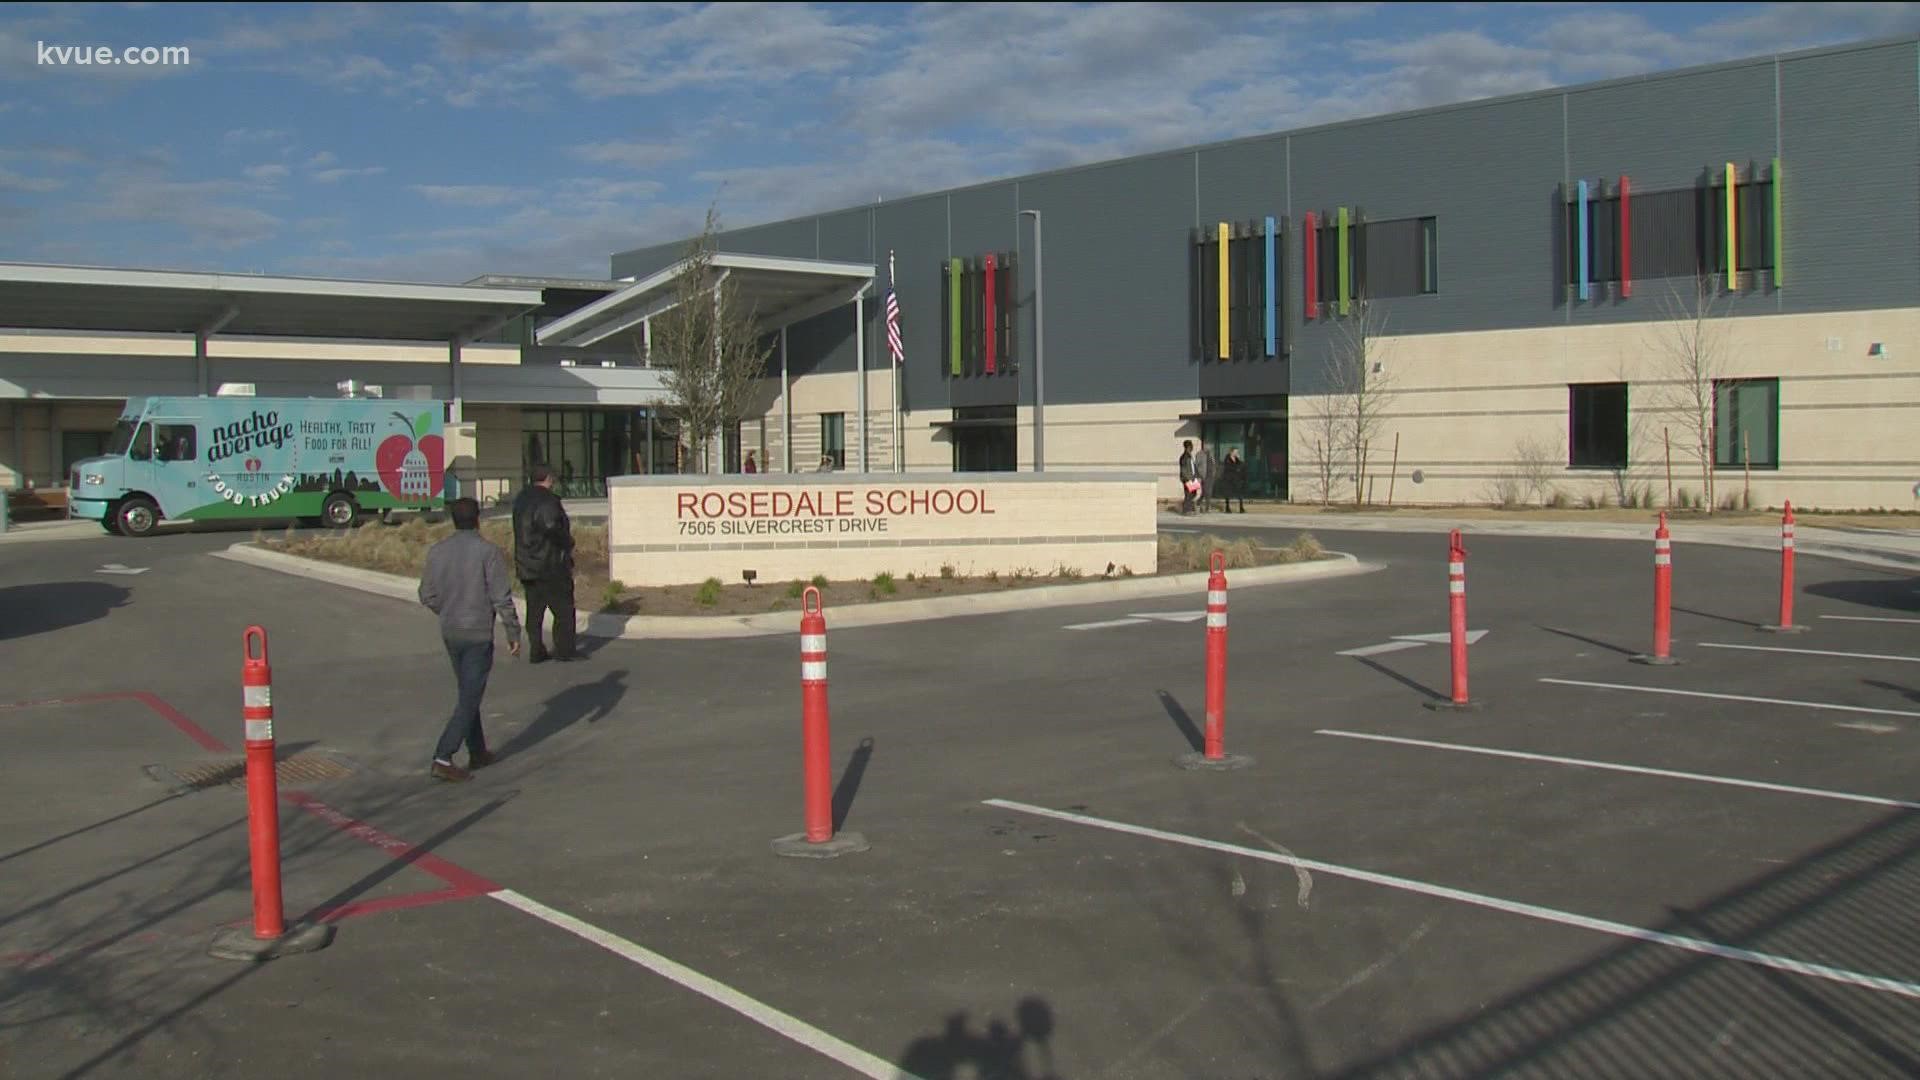 Austin ISD celebrated the reopening of the Rosedale School. The school helps students with special needs.